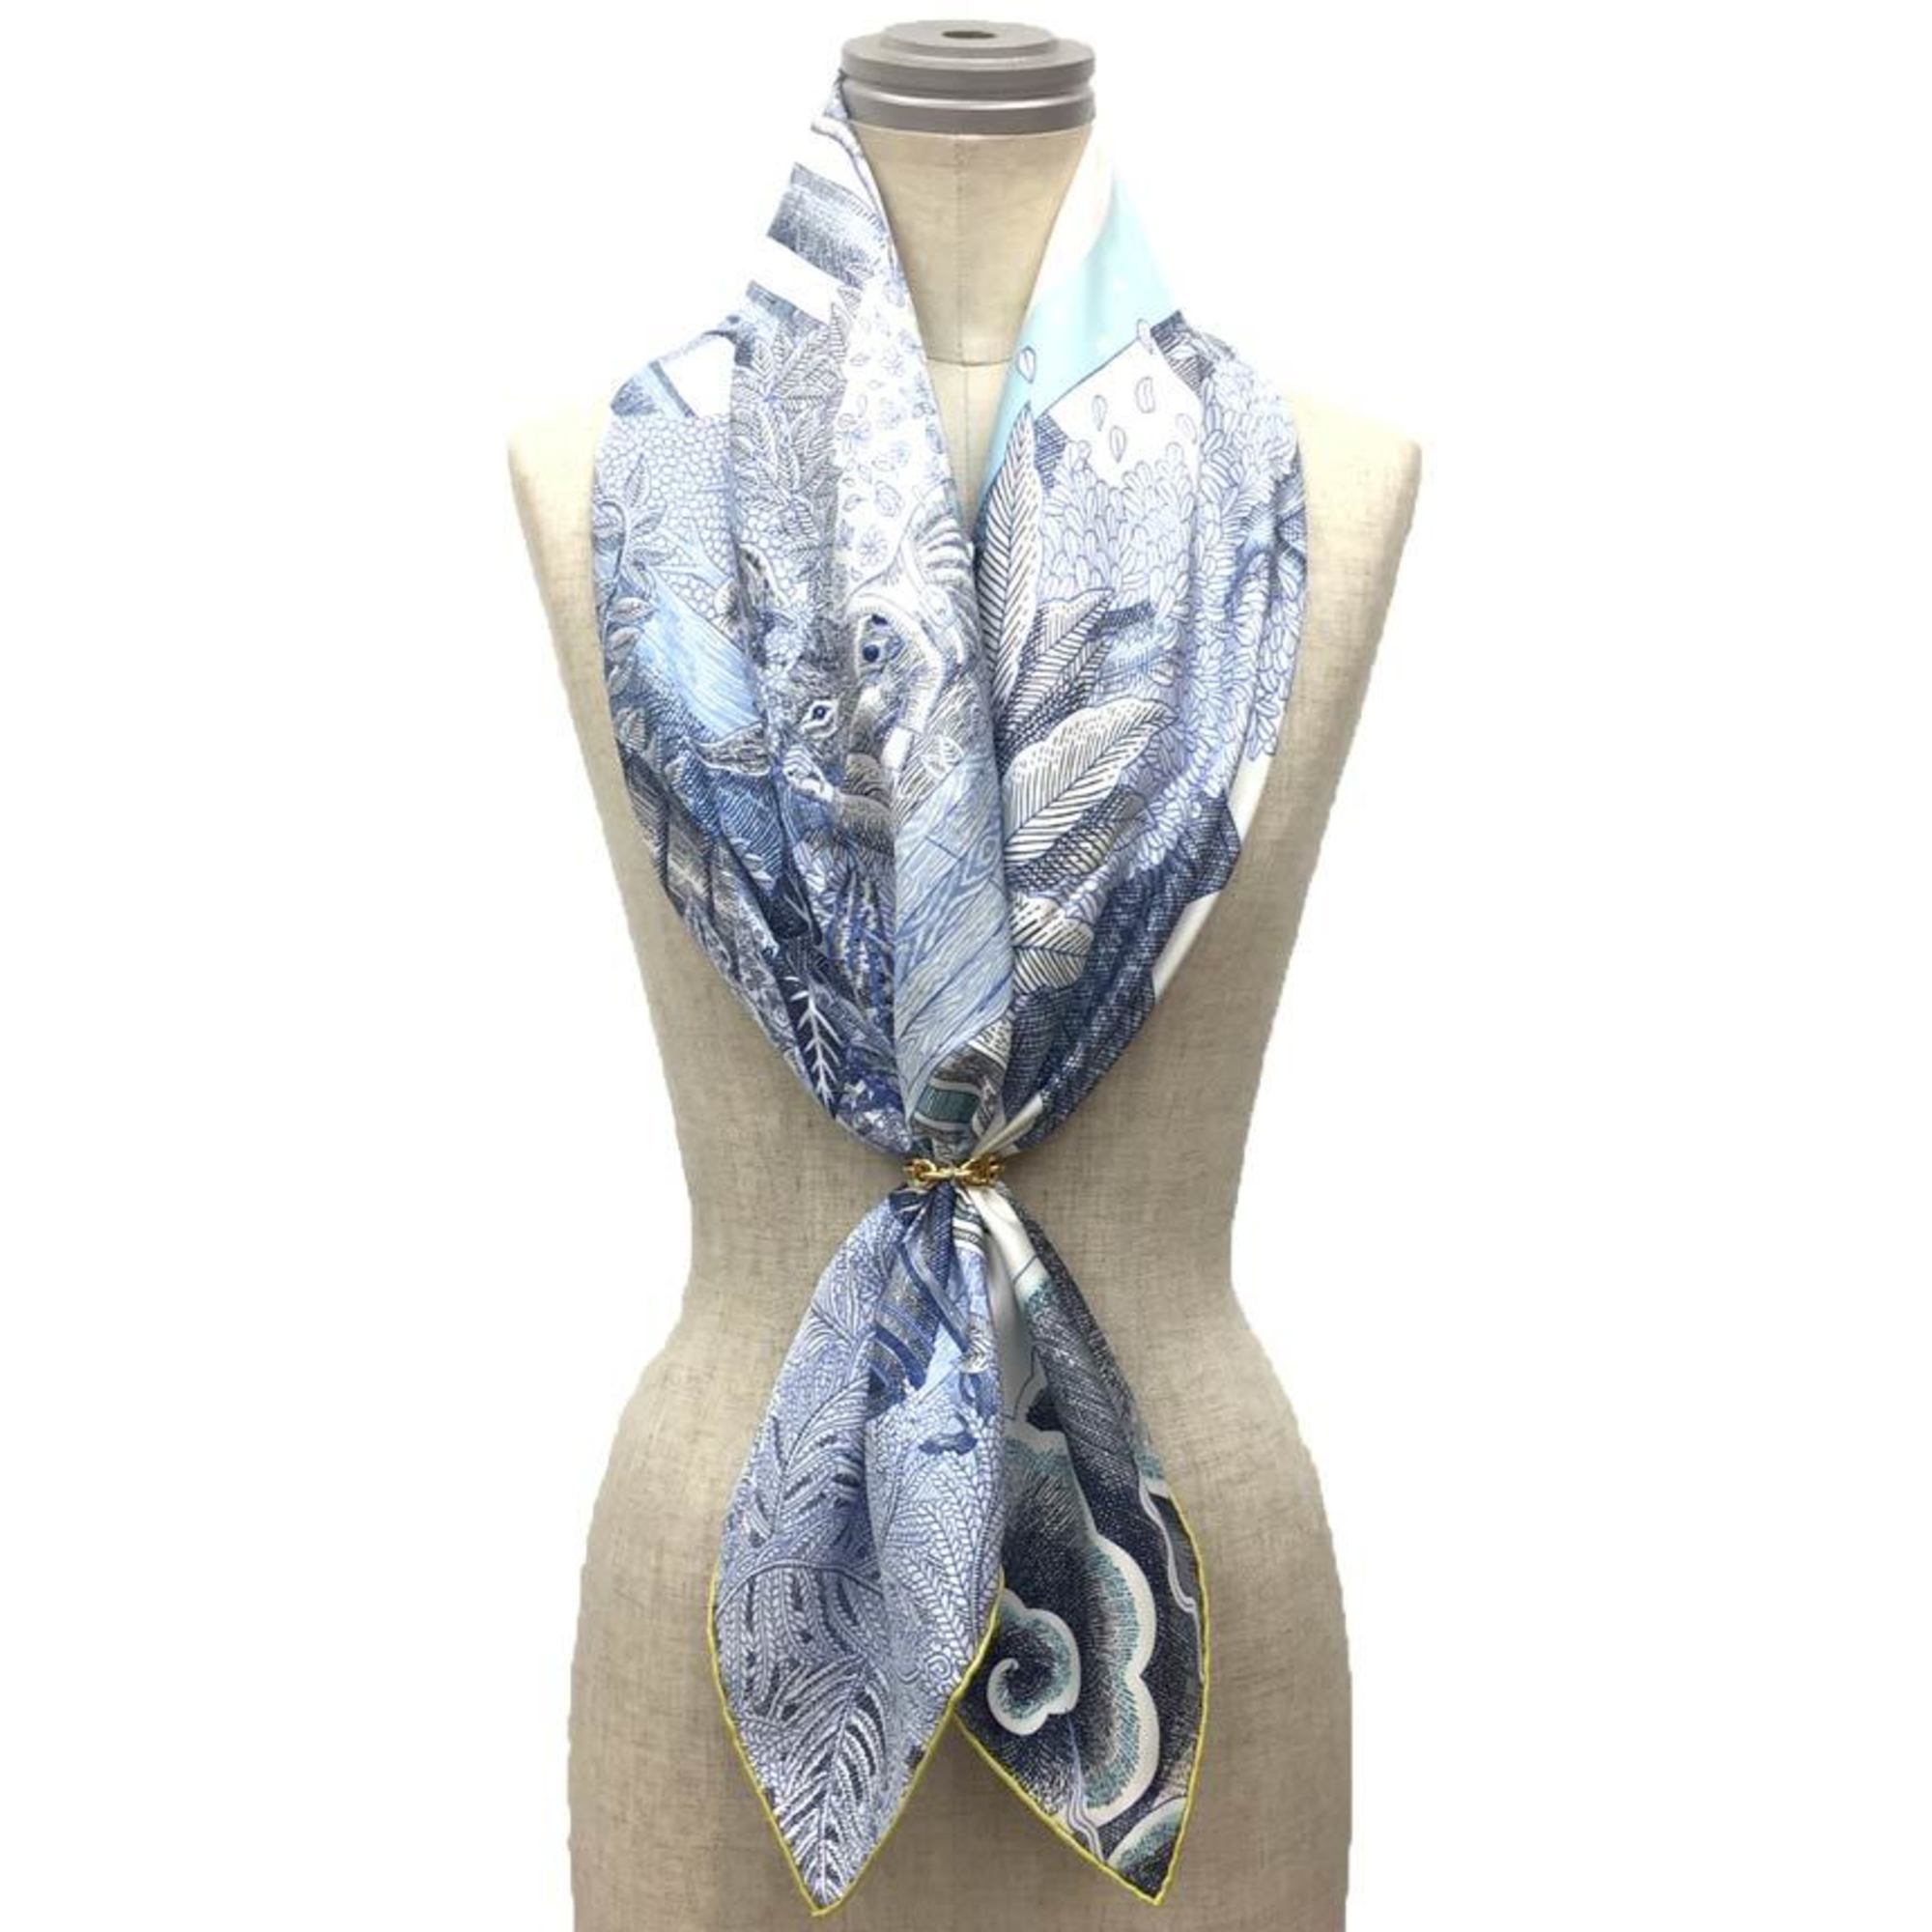 HERMES Scarf Muffler Carré 90 Act III Scene I La Clairiere 3, 1, In the Forest Glade H003228S Moon Shakespeare 100% Silk Blue GR/BLANC/BLEU JEAN aq10143 10013839